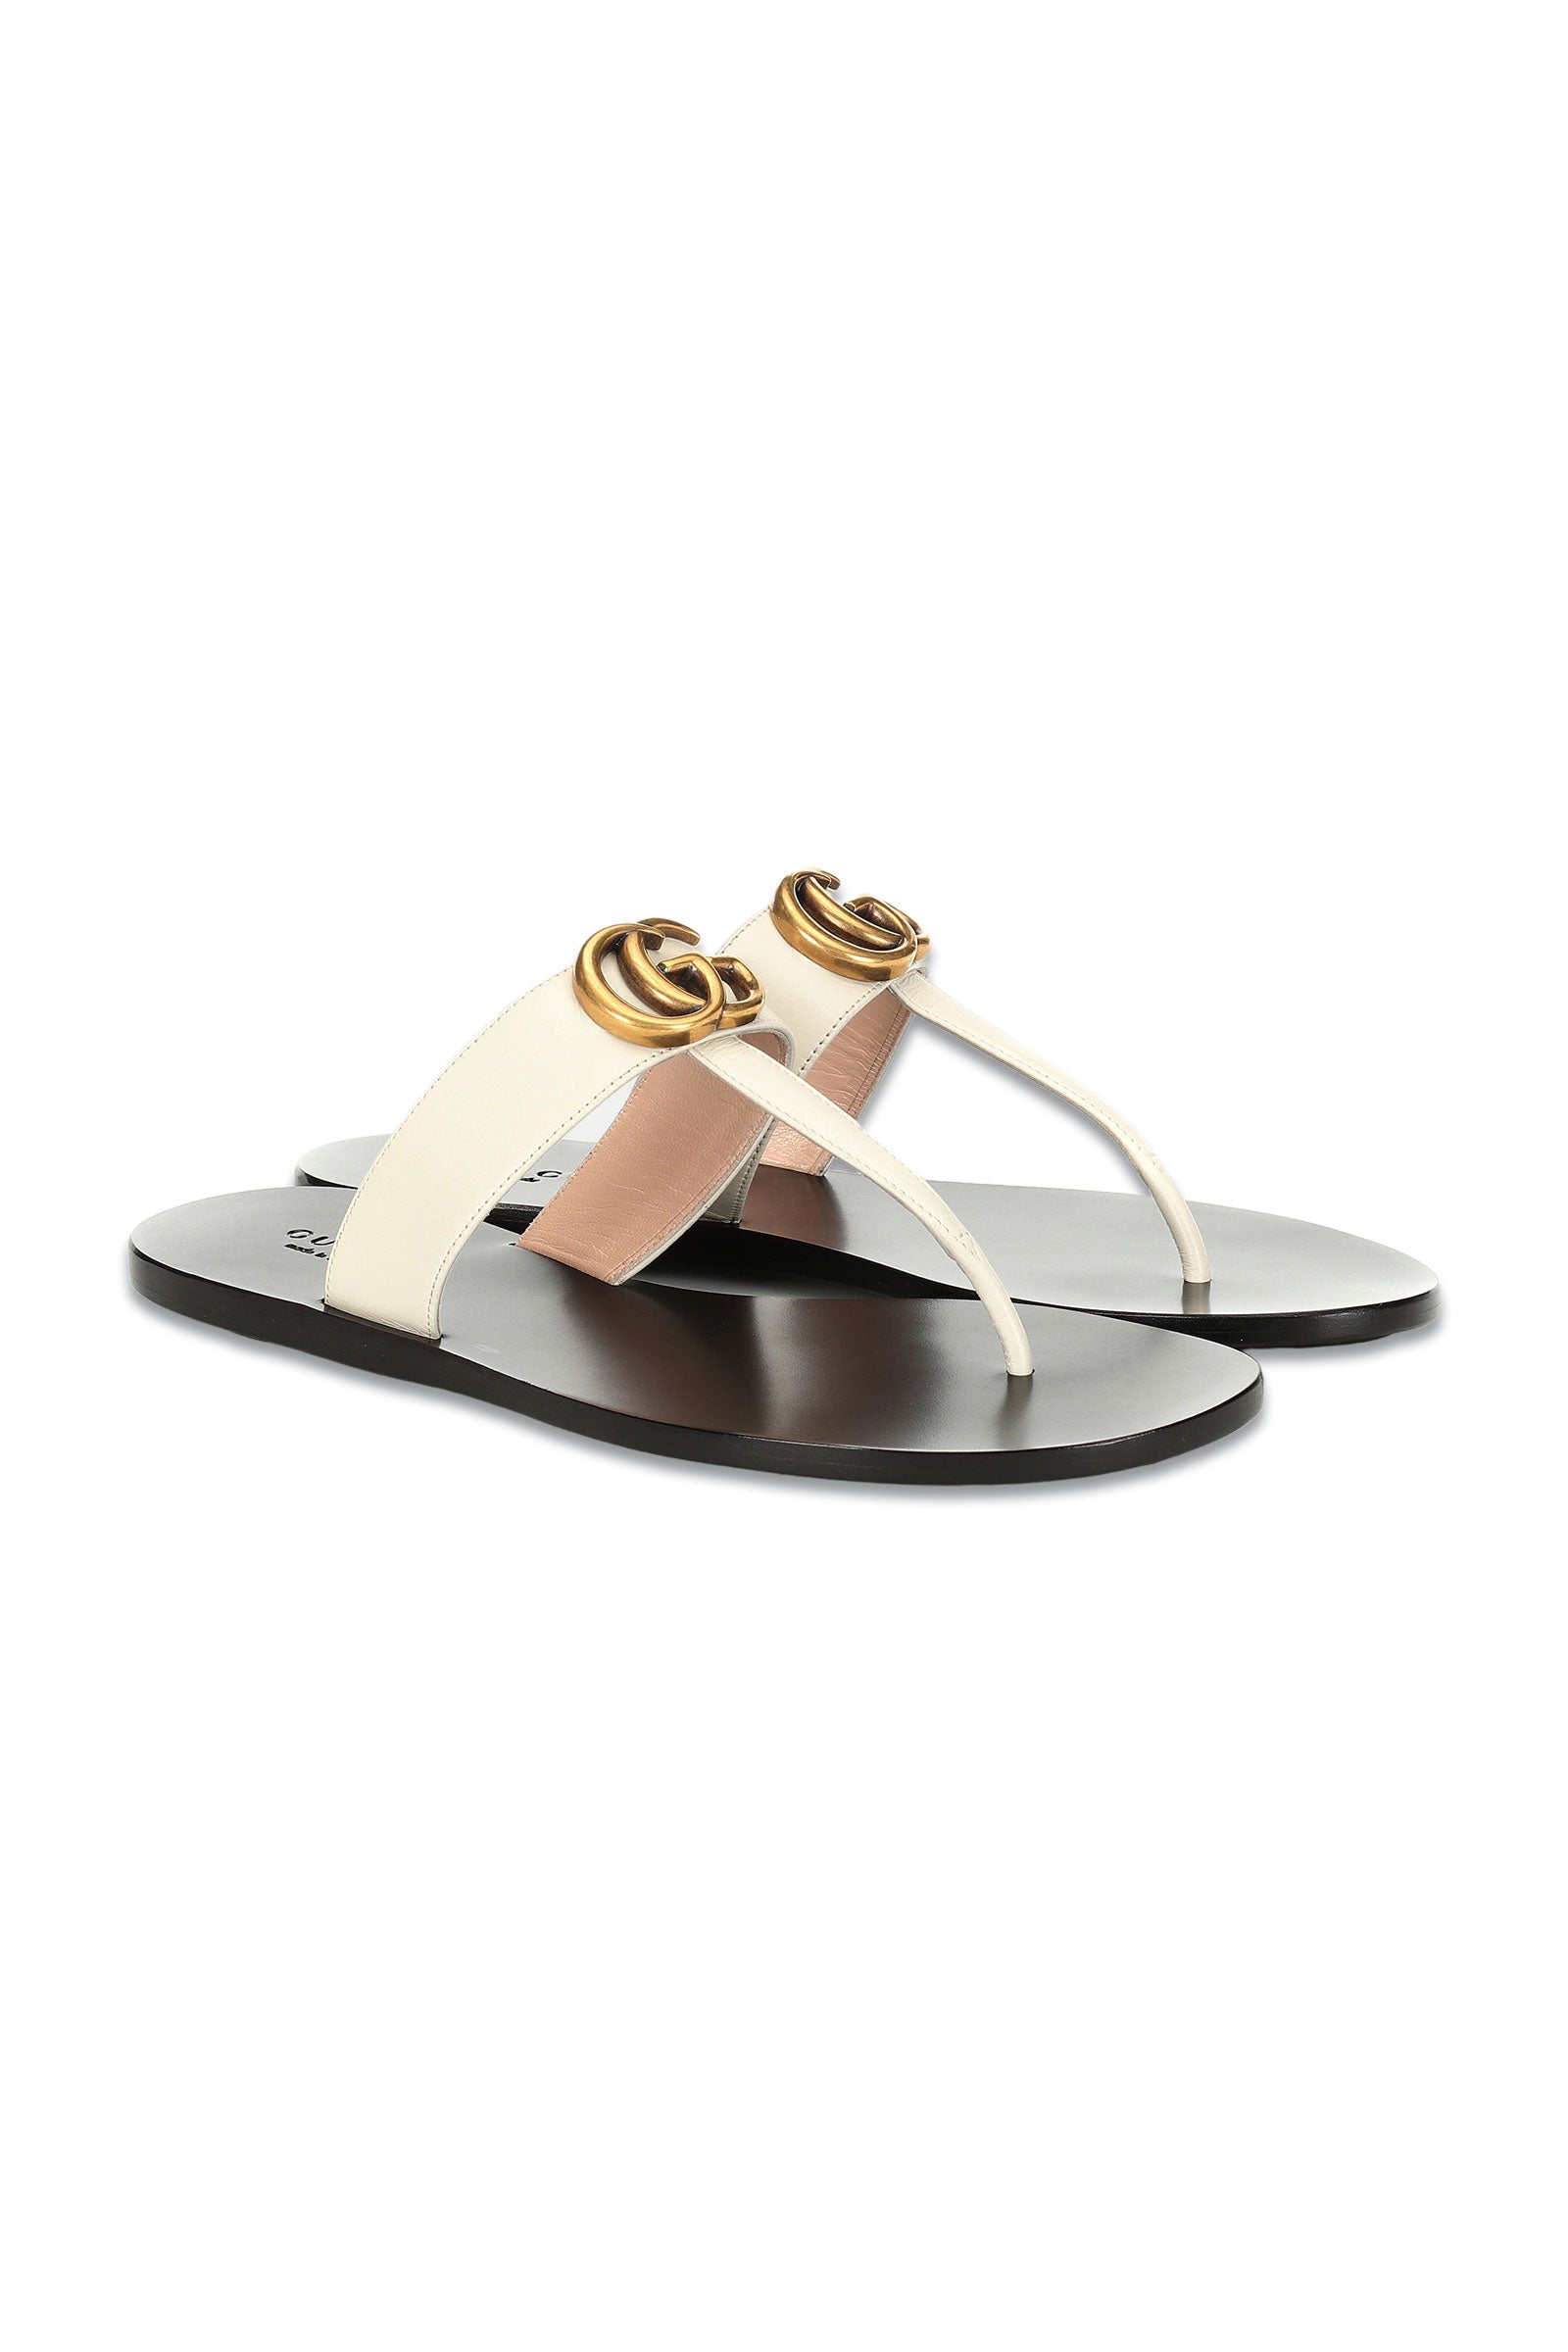 GUCCI Metallic Thong GG Sandals Gold | Luxity